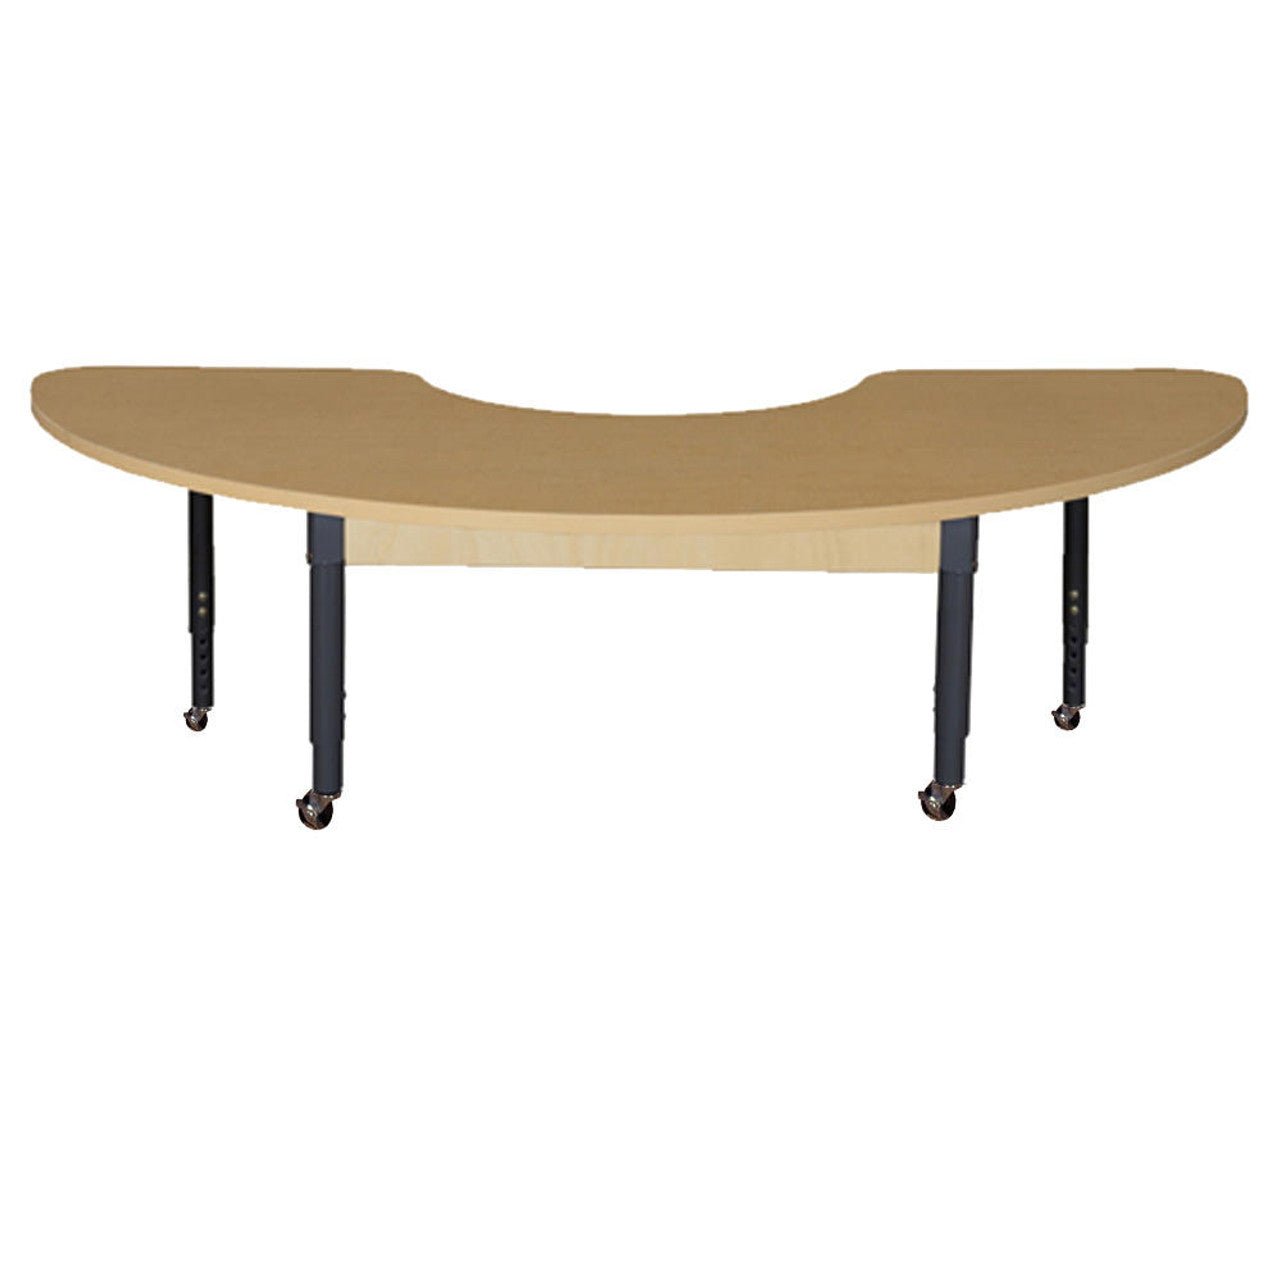 Mobile Half Circle High Pressure Laminate Table with Adjustable Legs 14-19"